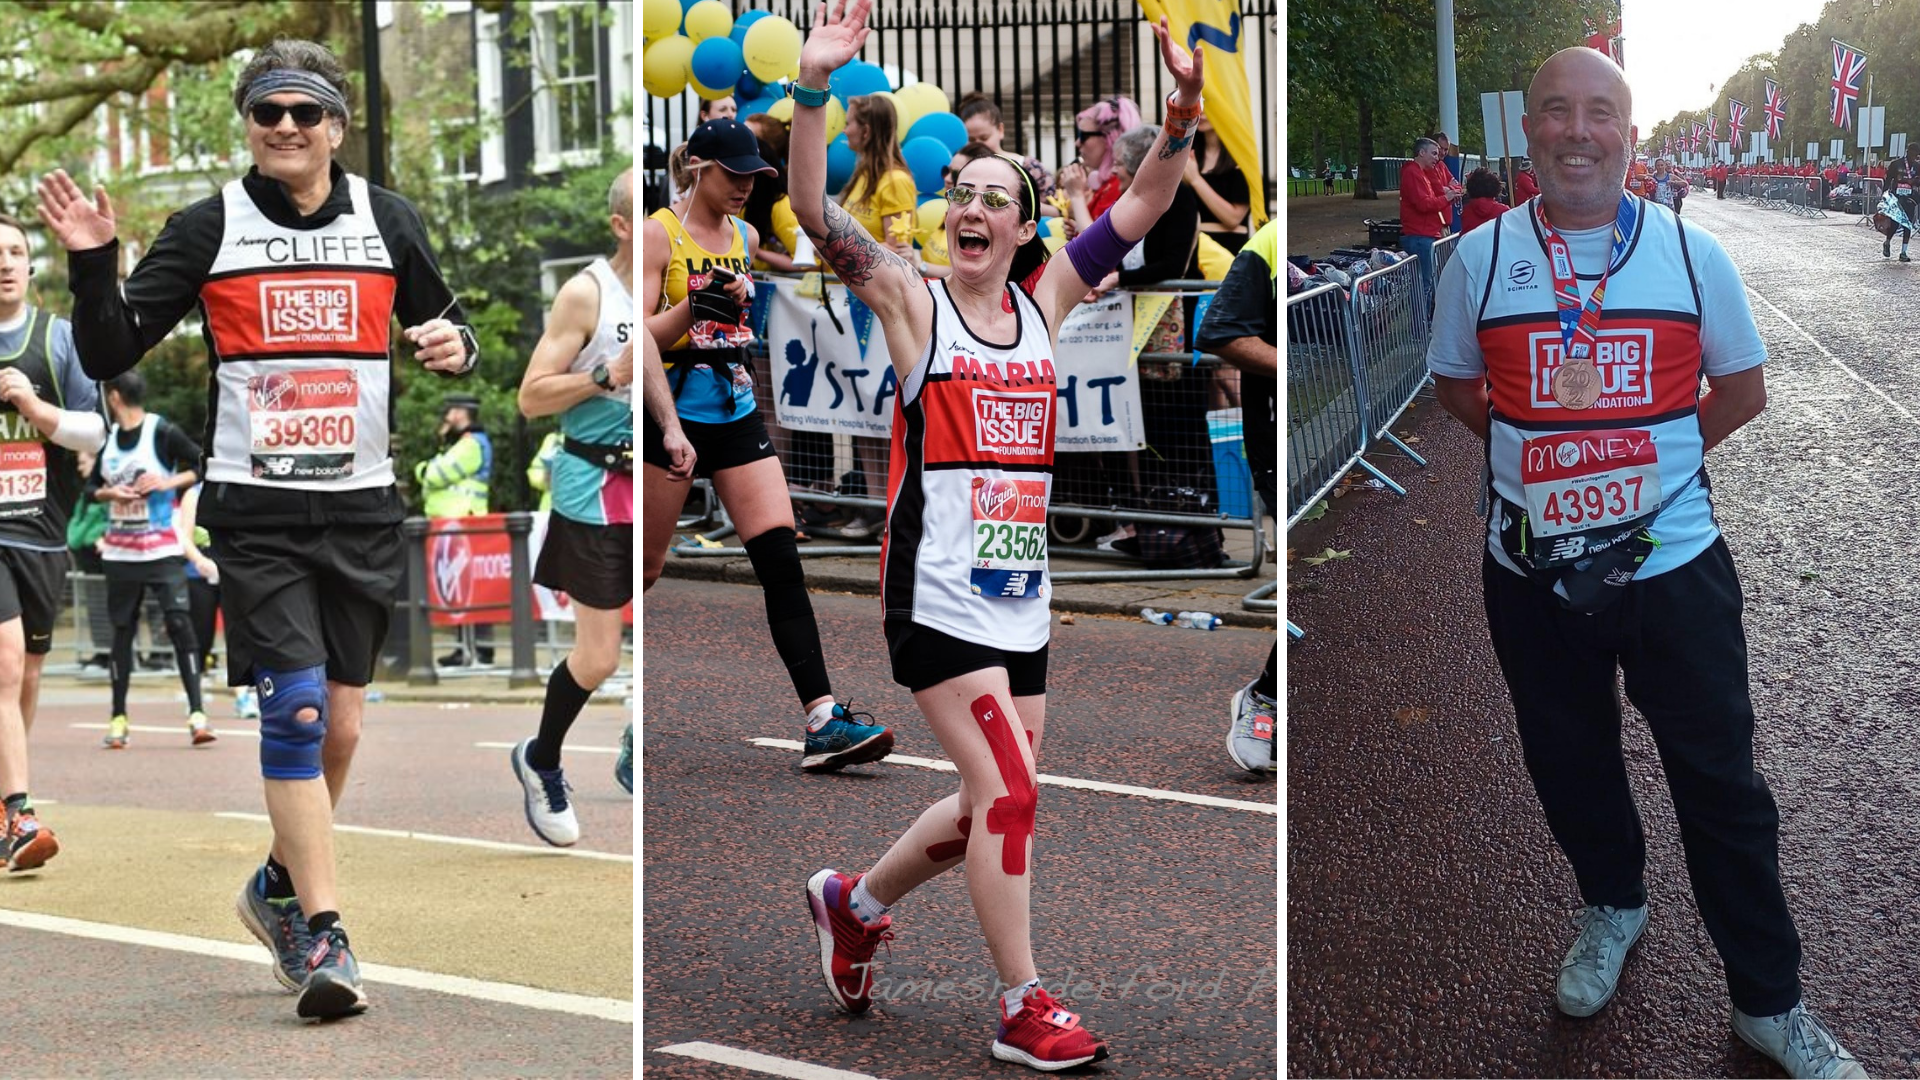 Big Issue supporters taking on the London Marathon